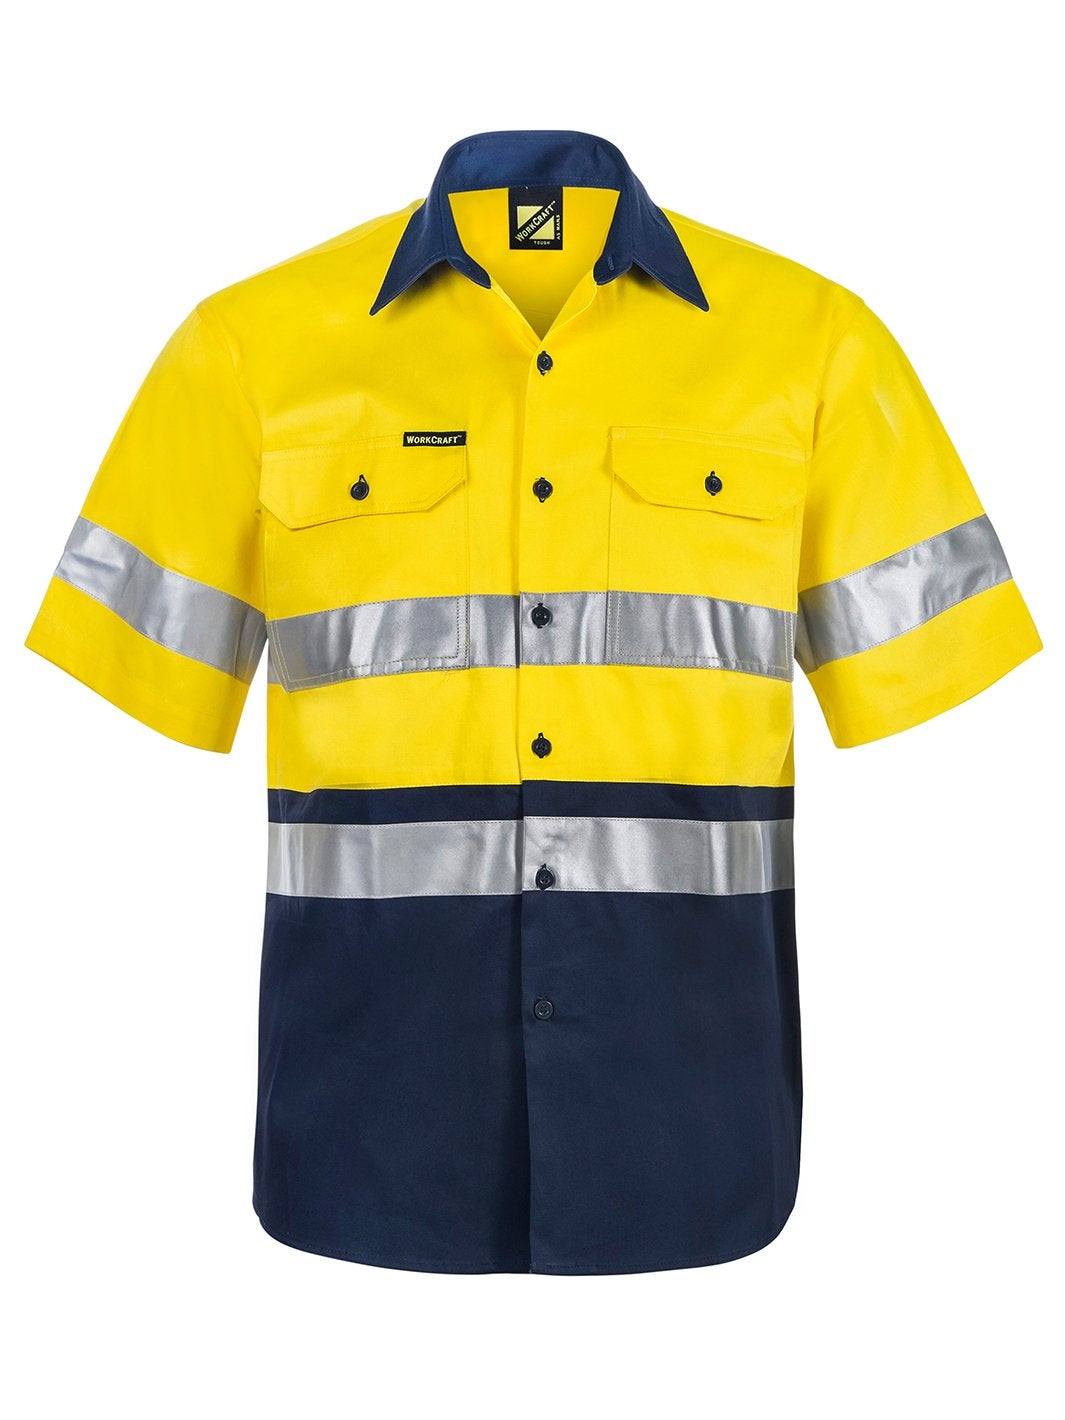 WorkCraft Hi Vis Taped Two Tone Cotton Drill Shirt WS4001